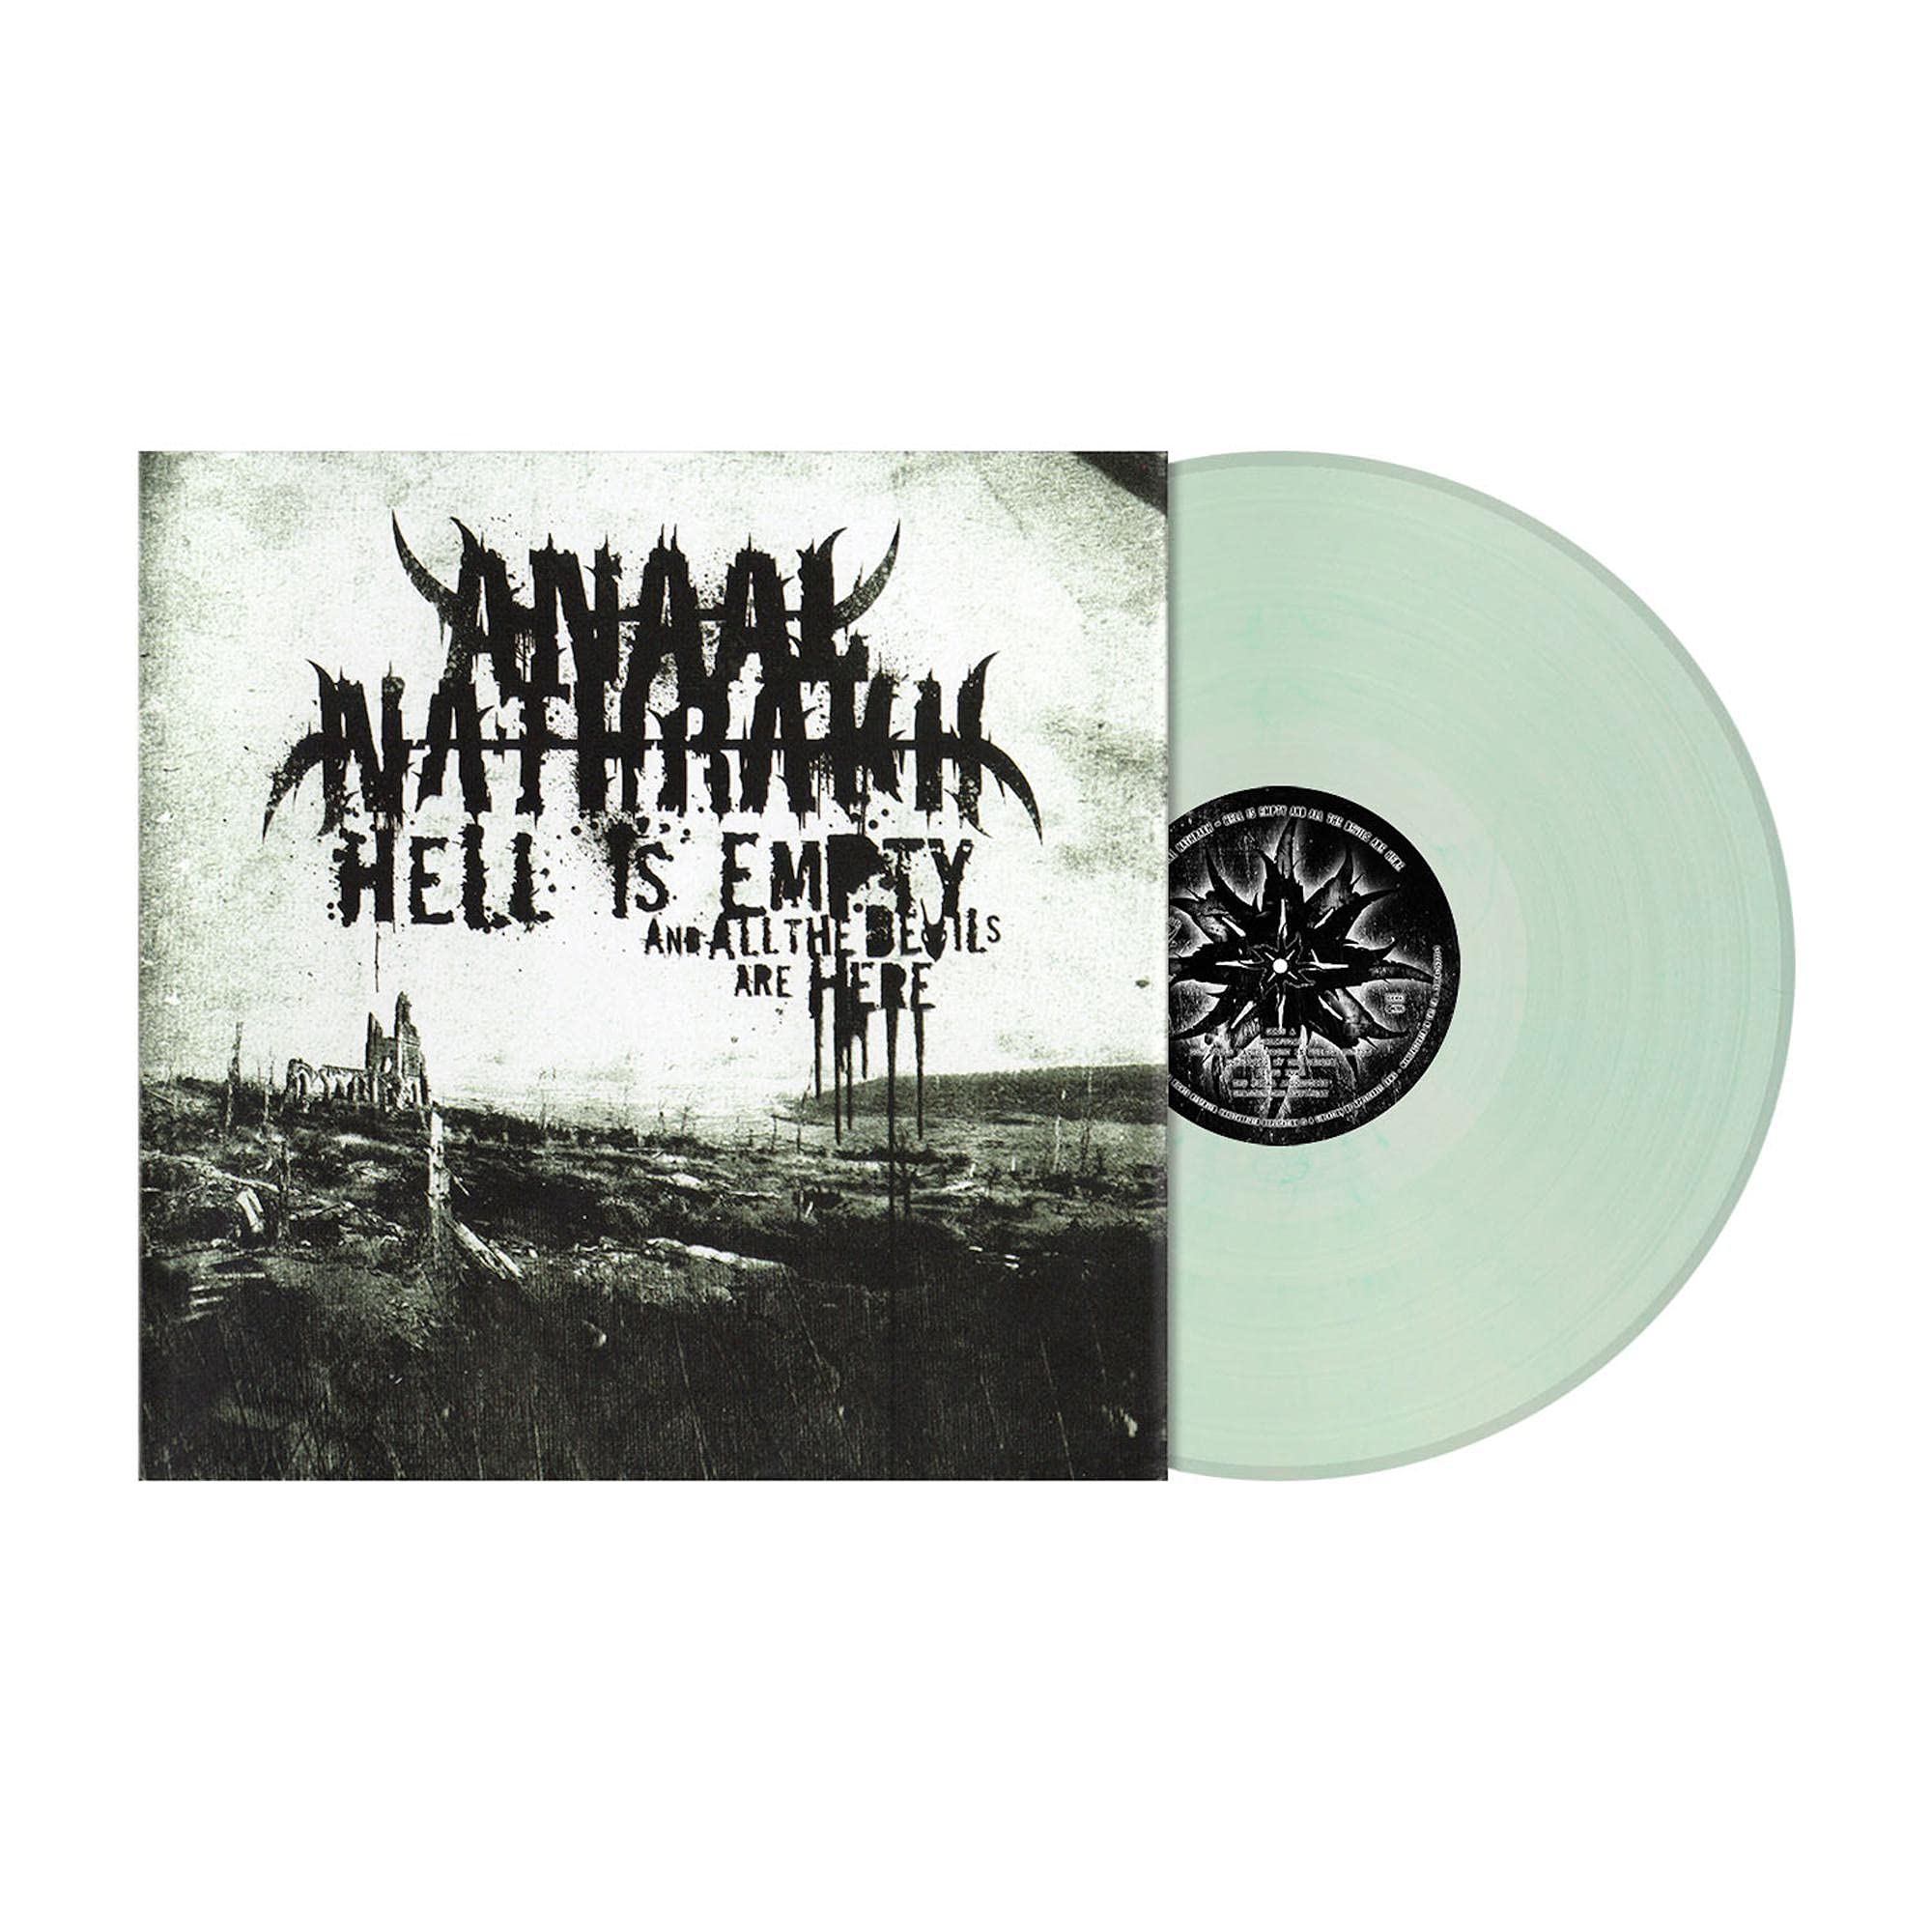 Hell Is Empty, And All The Devils Are Here (Vinyl) on MovieShack